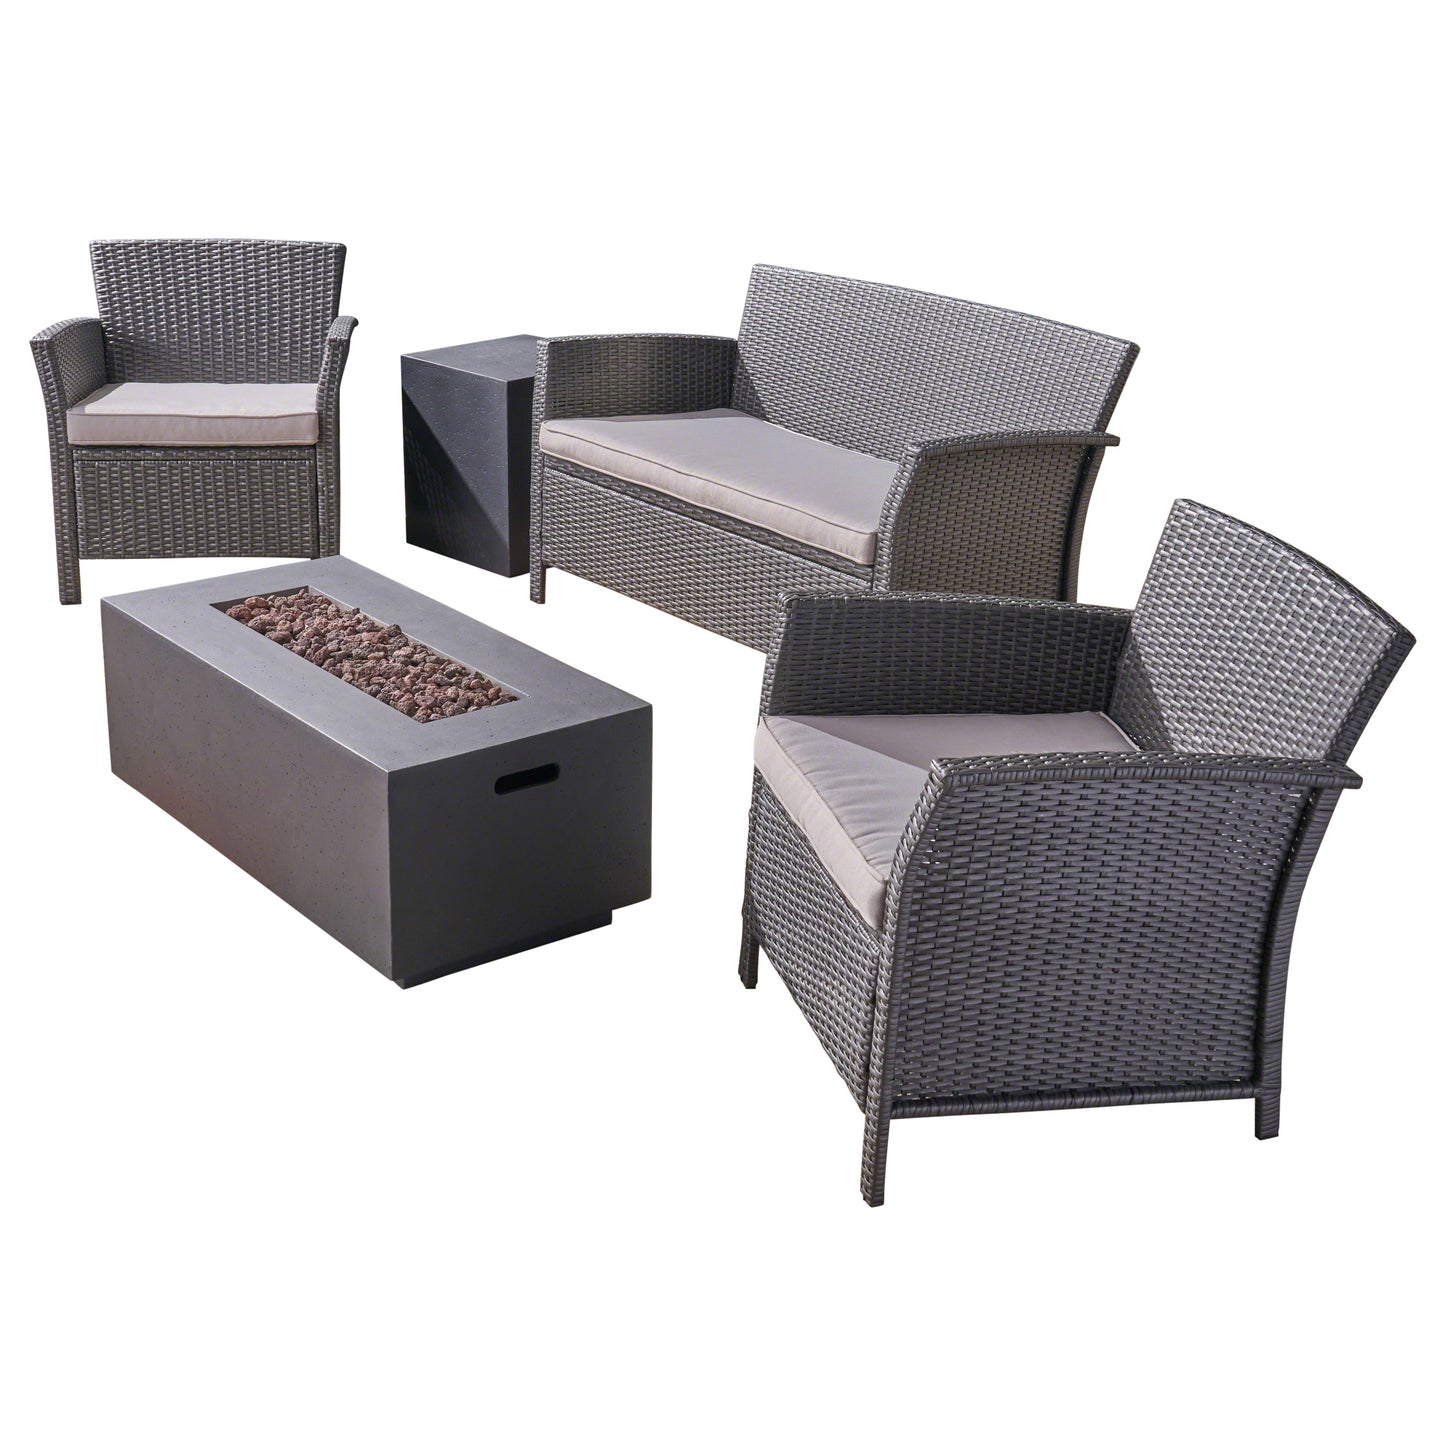 Laiah Outdoor 4 Seater Wicker Chat Set with Fire Pit